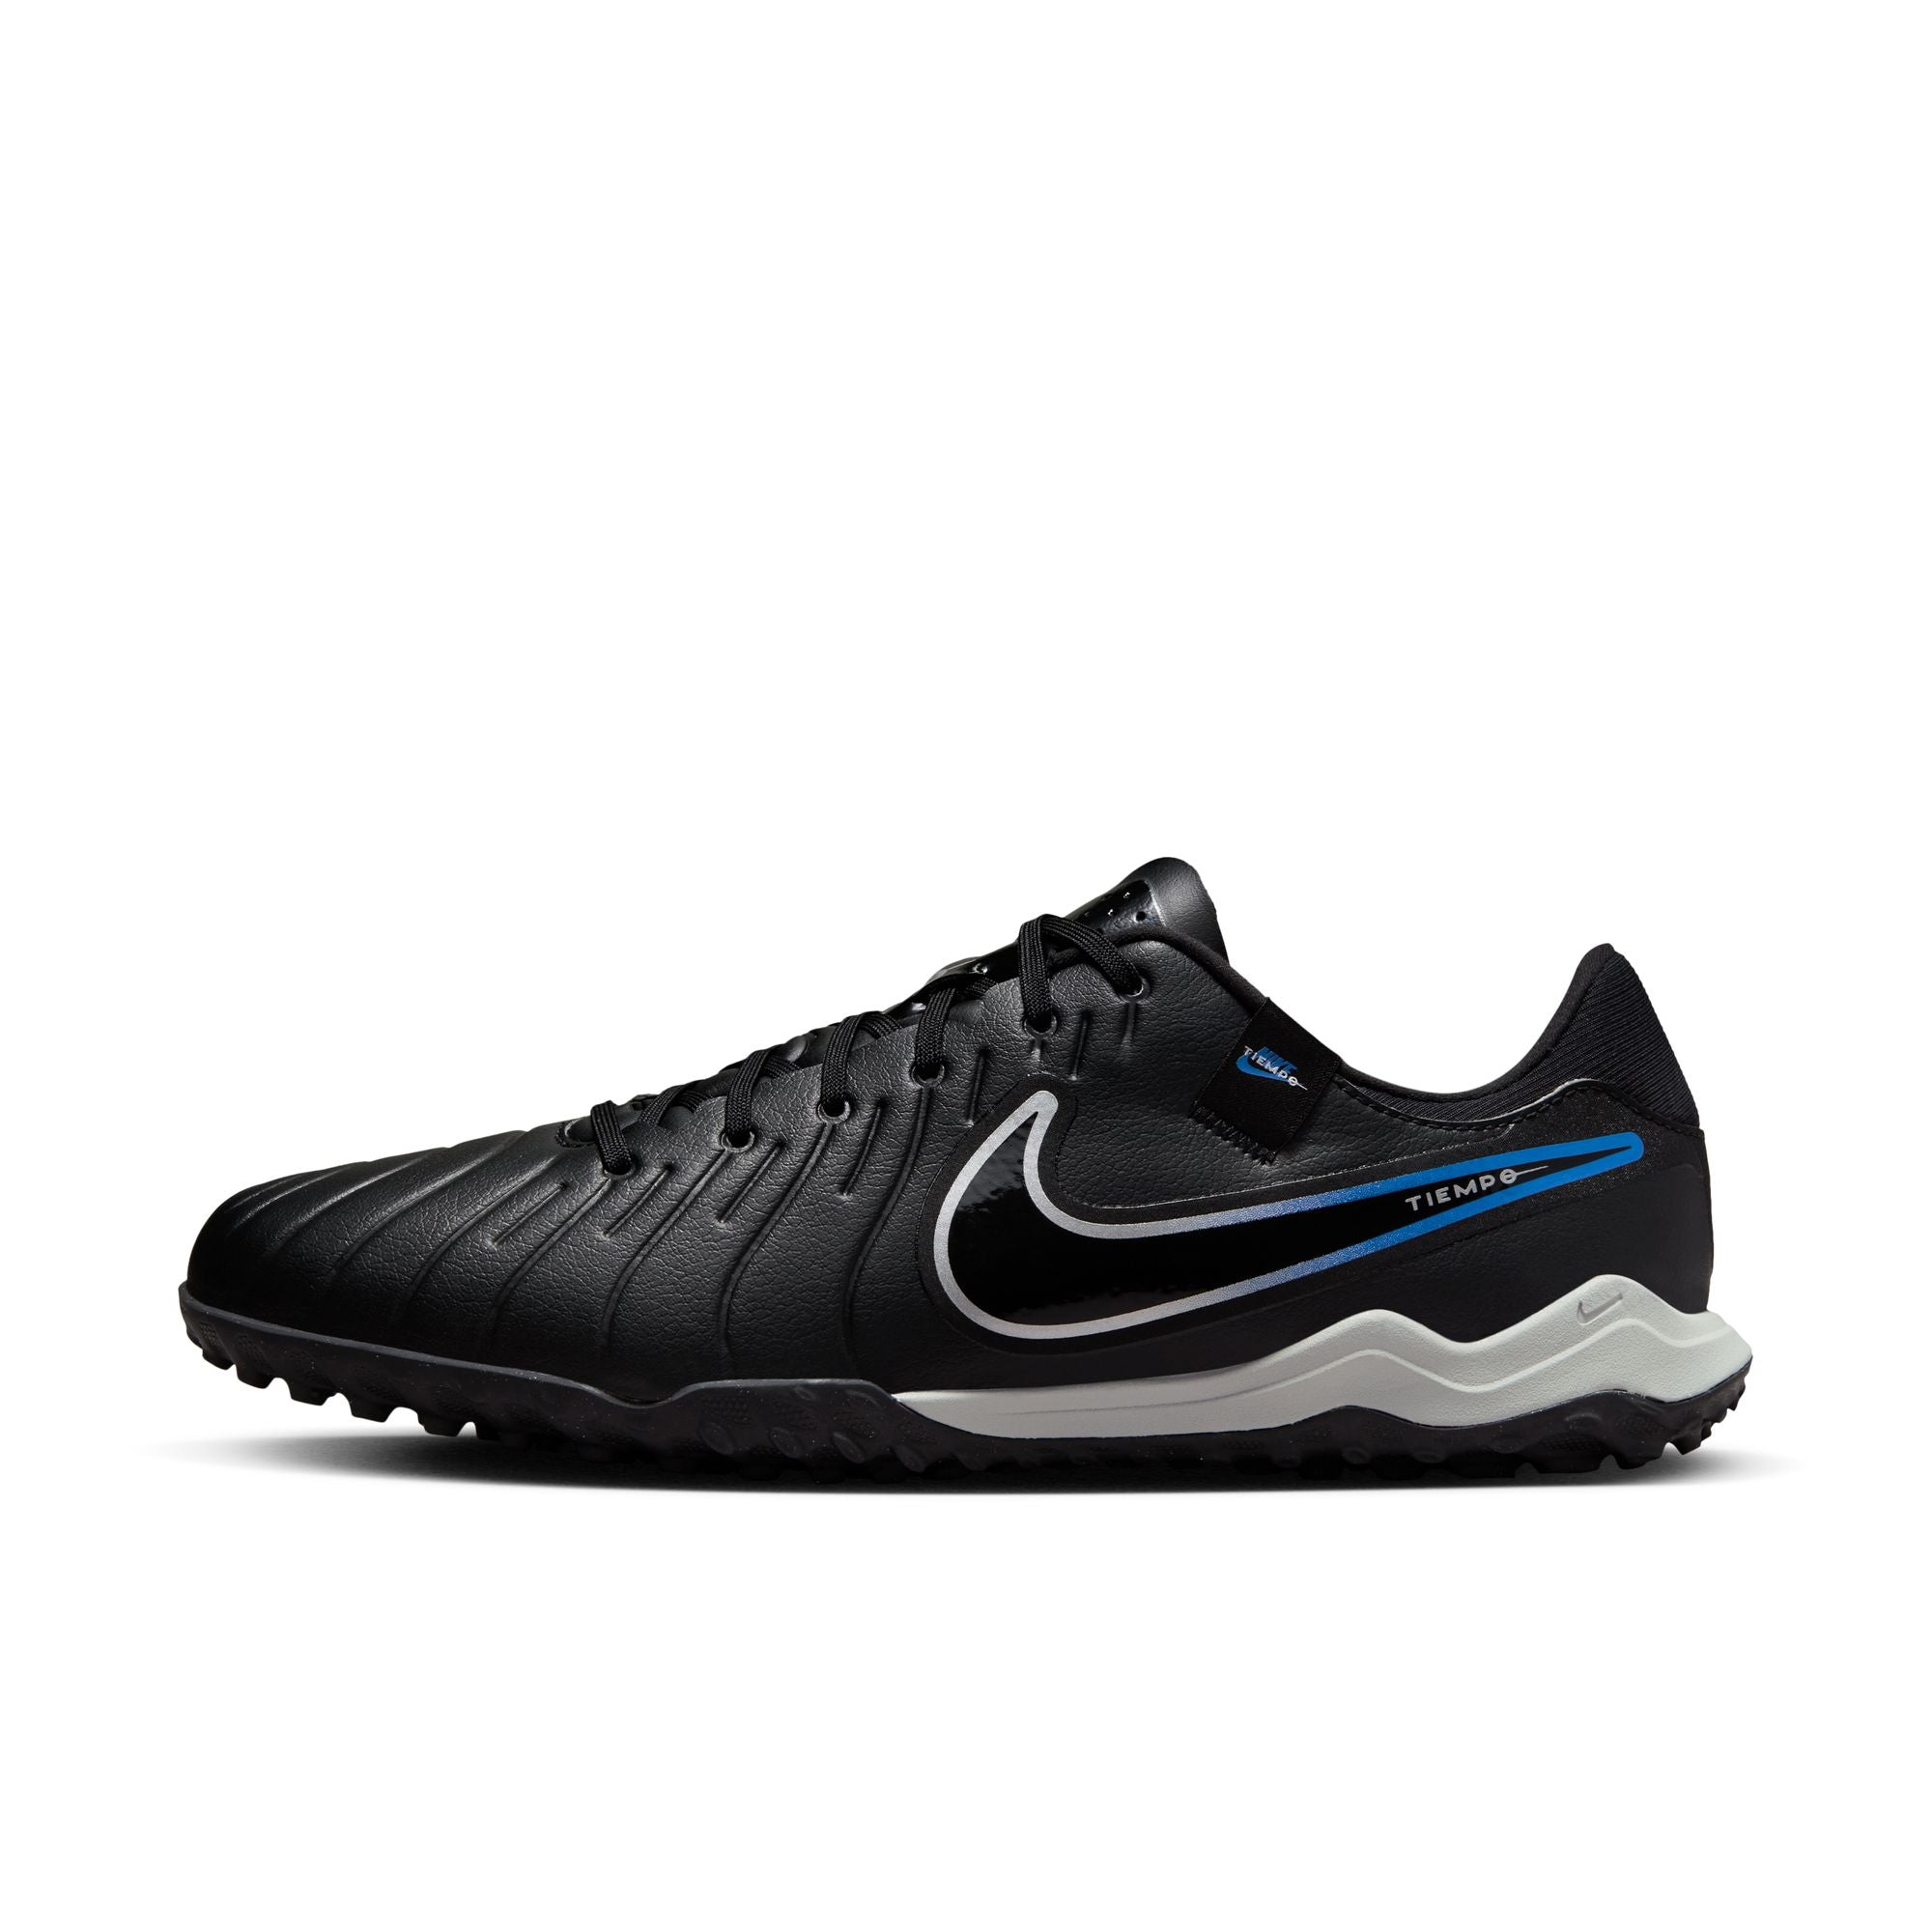 Nike Tiempo Legend 10 Academy Turf Soccer Shoes